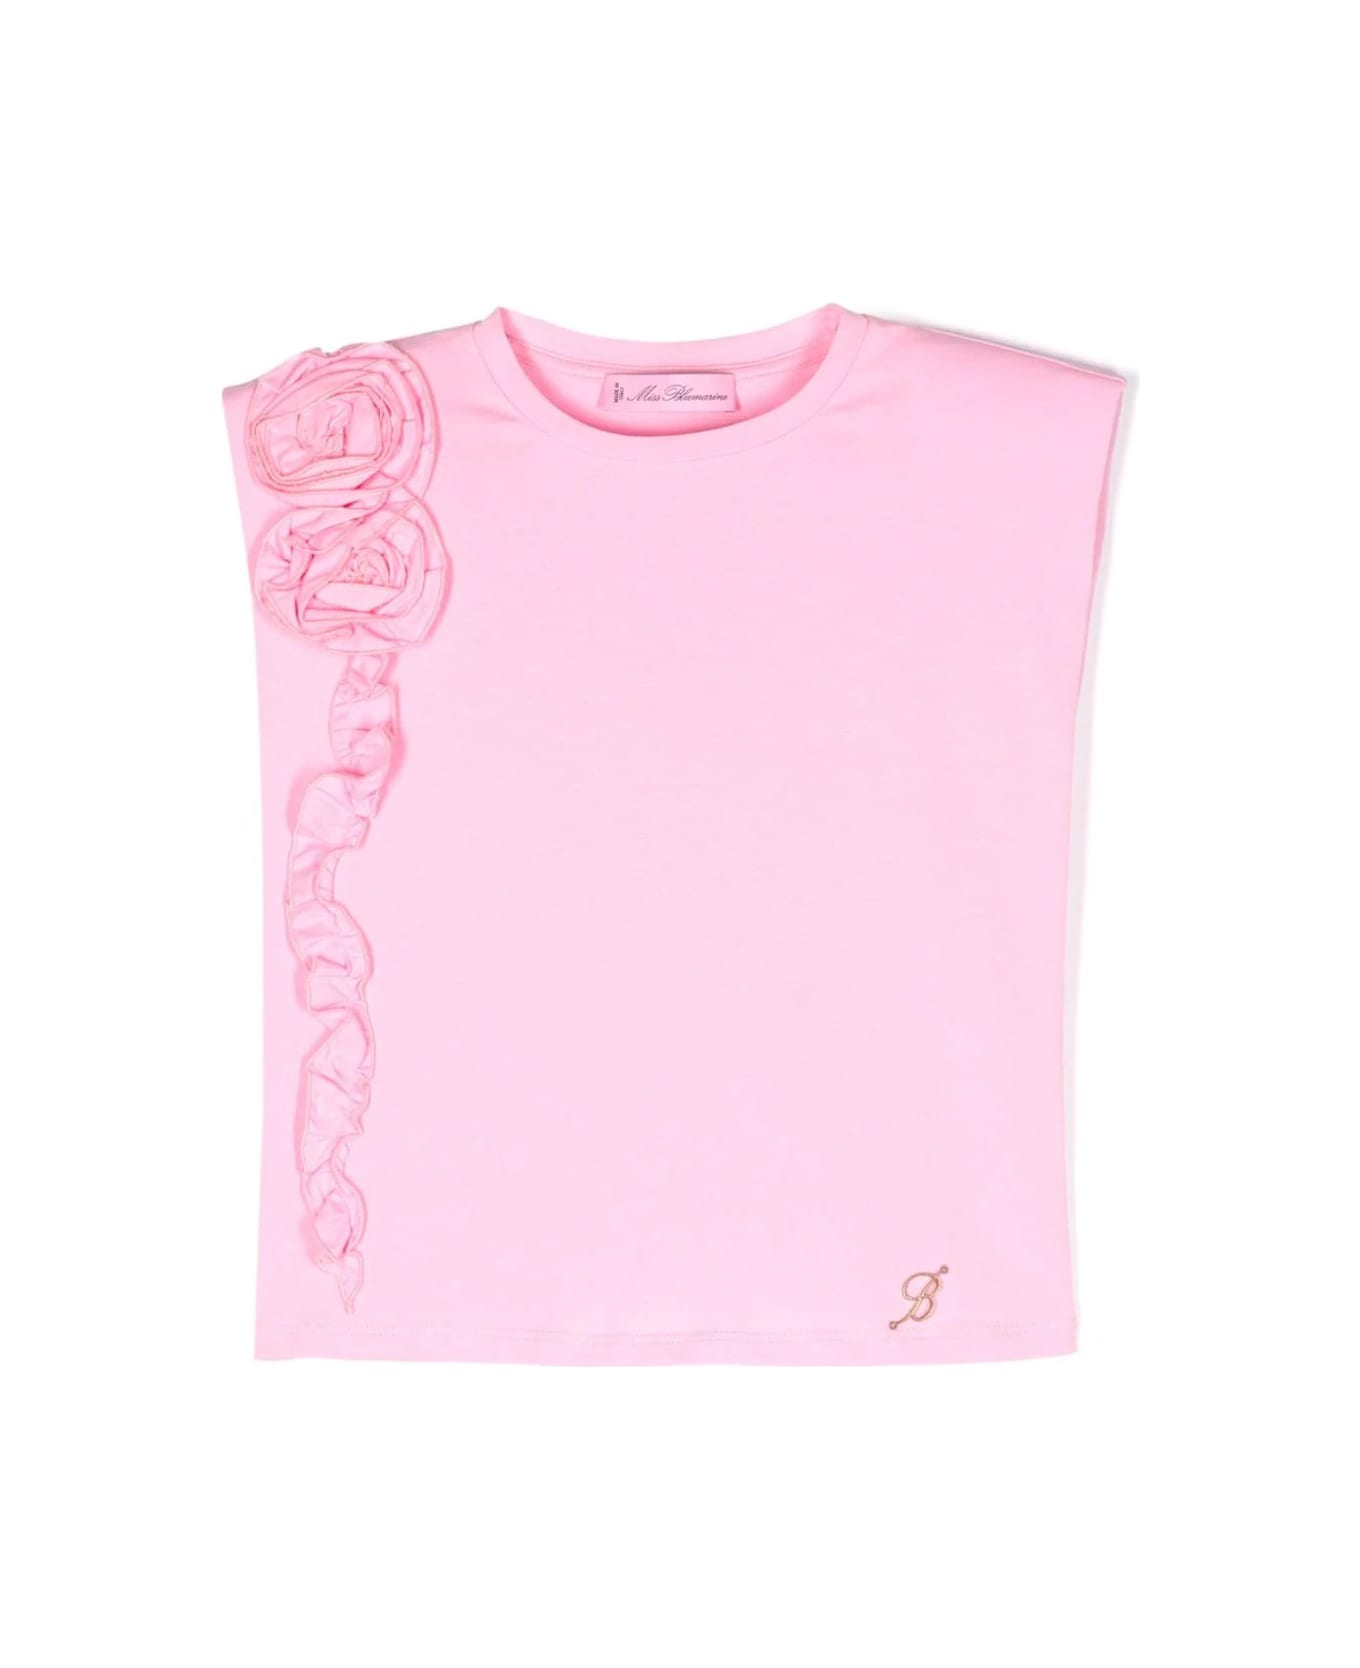 Miss Blumarine Pink T-shirt With Flowers And Ruffles - Pink Tシャツ＆ポロシャツ